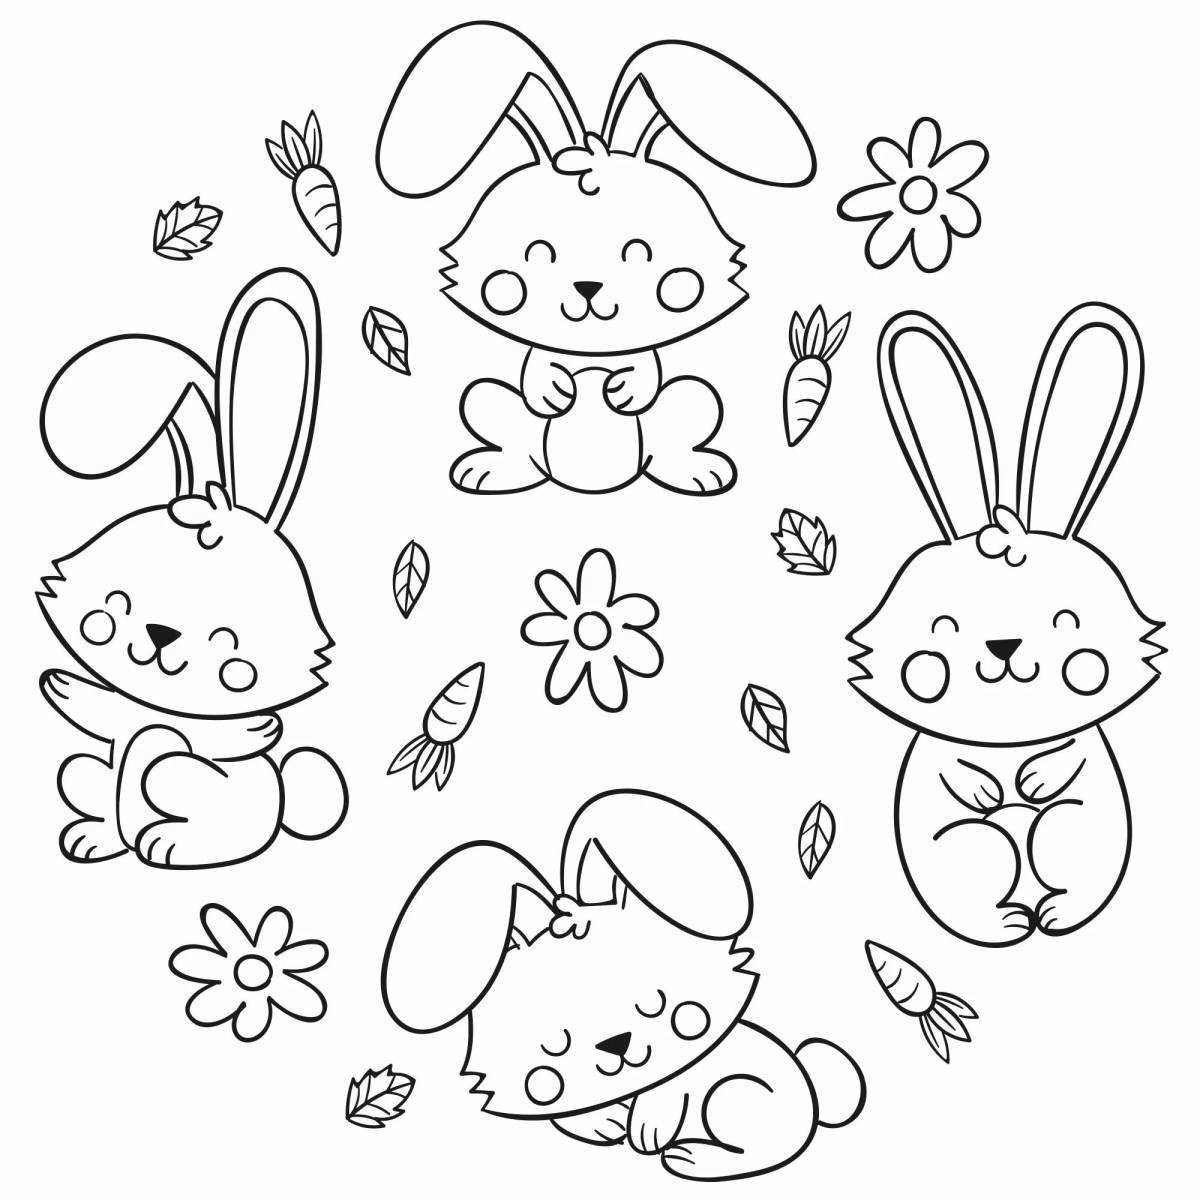 Funny bunny coloring book